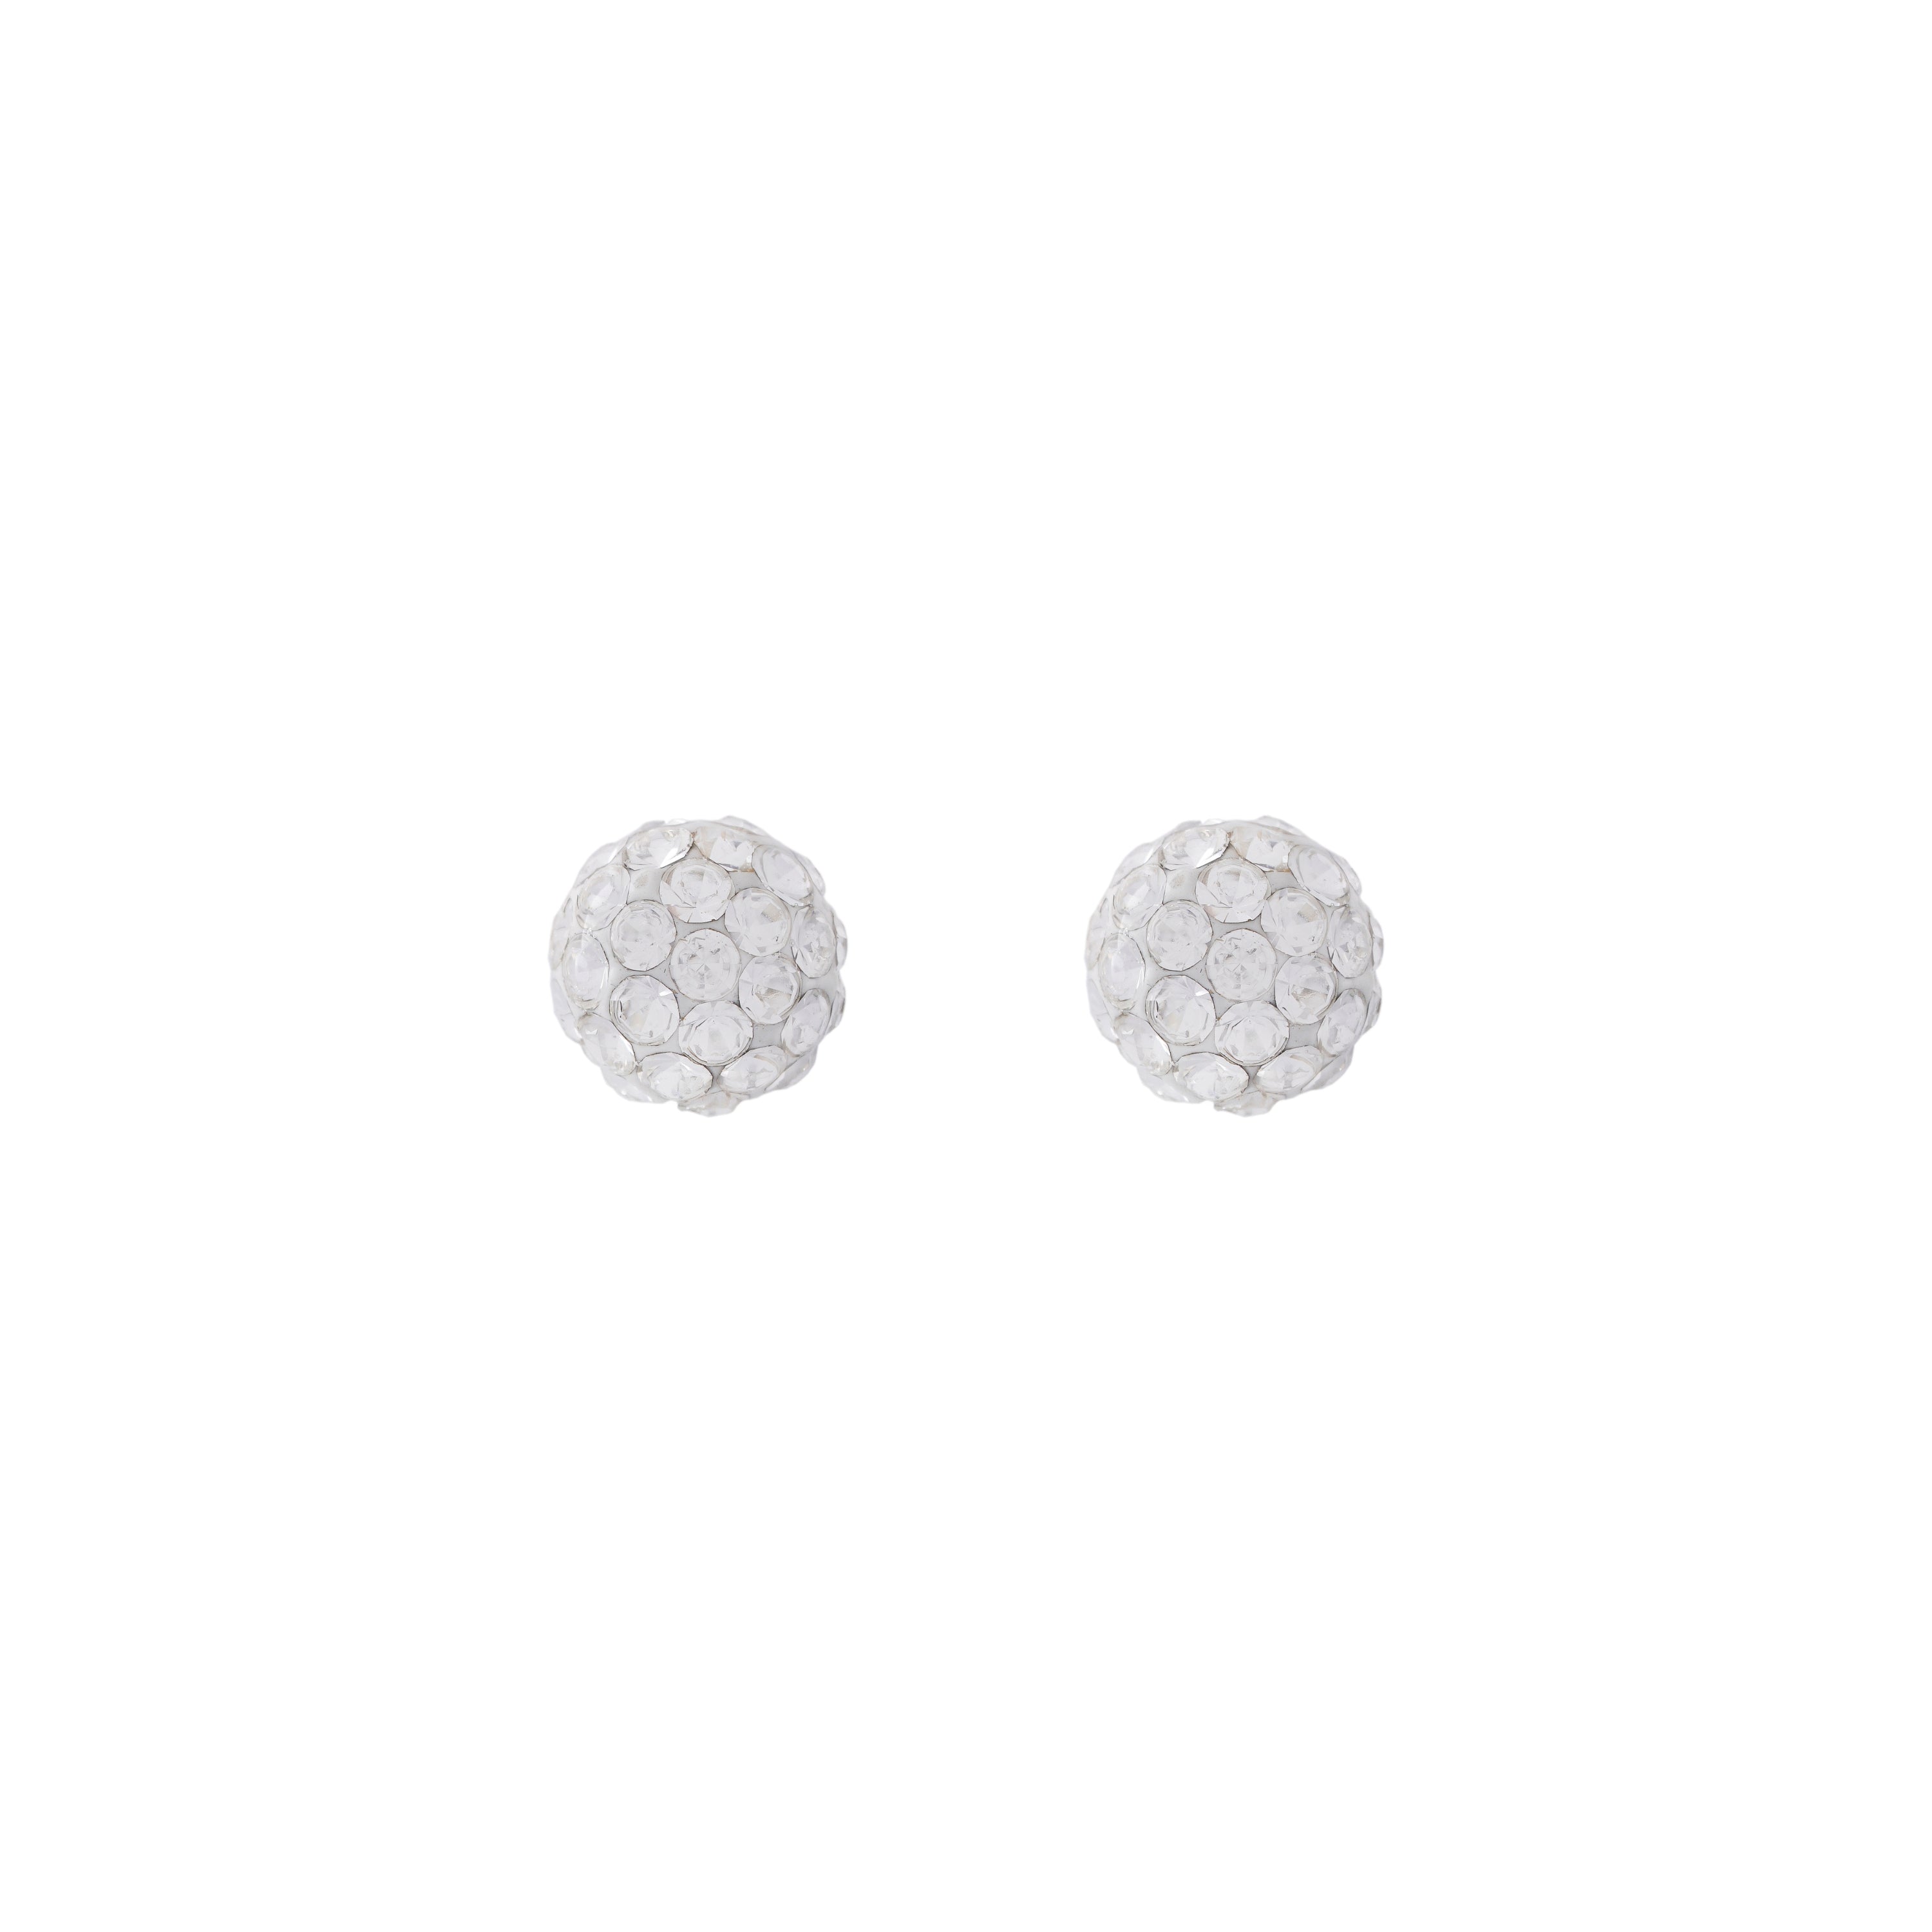 6MM Fireball Ð Crystal Allergy free Stainless Steel Ear Studs | MADE IN USA | Ideal for everyday wear